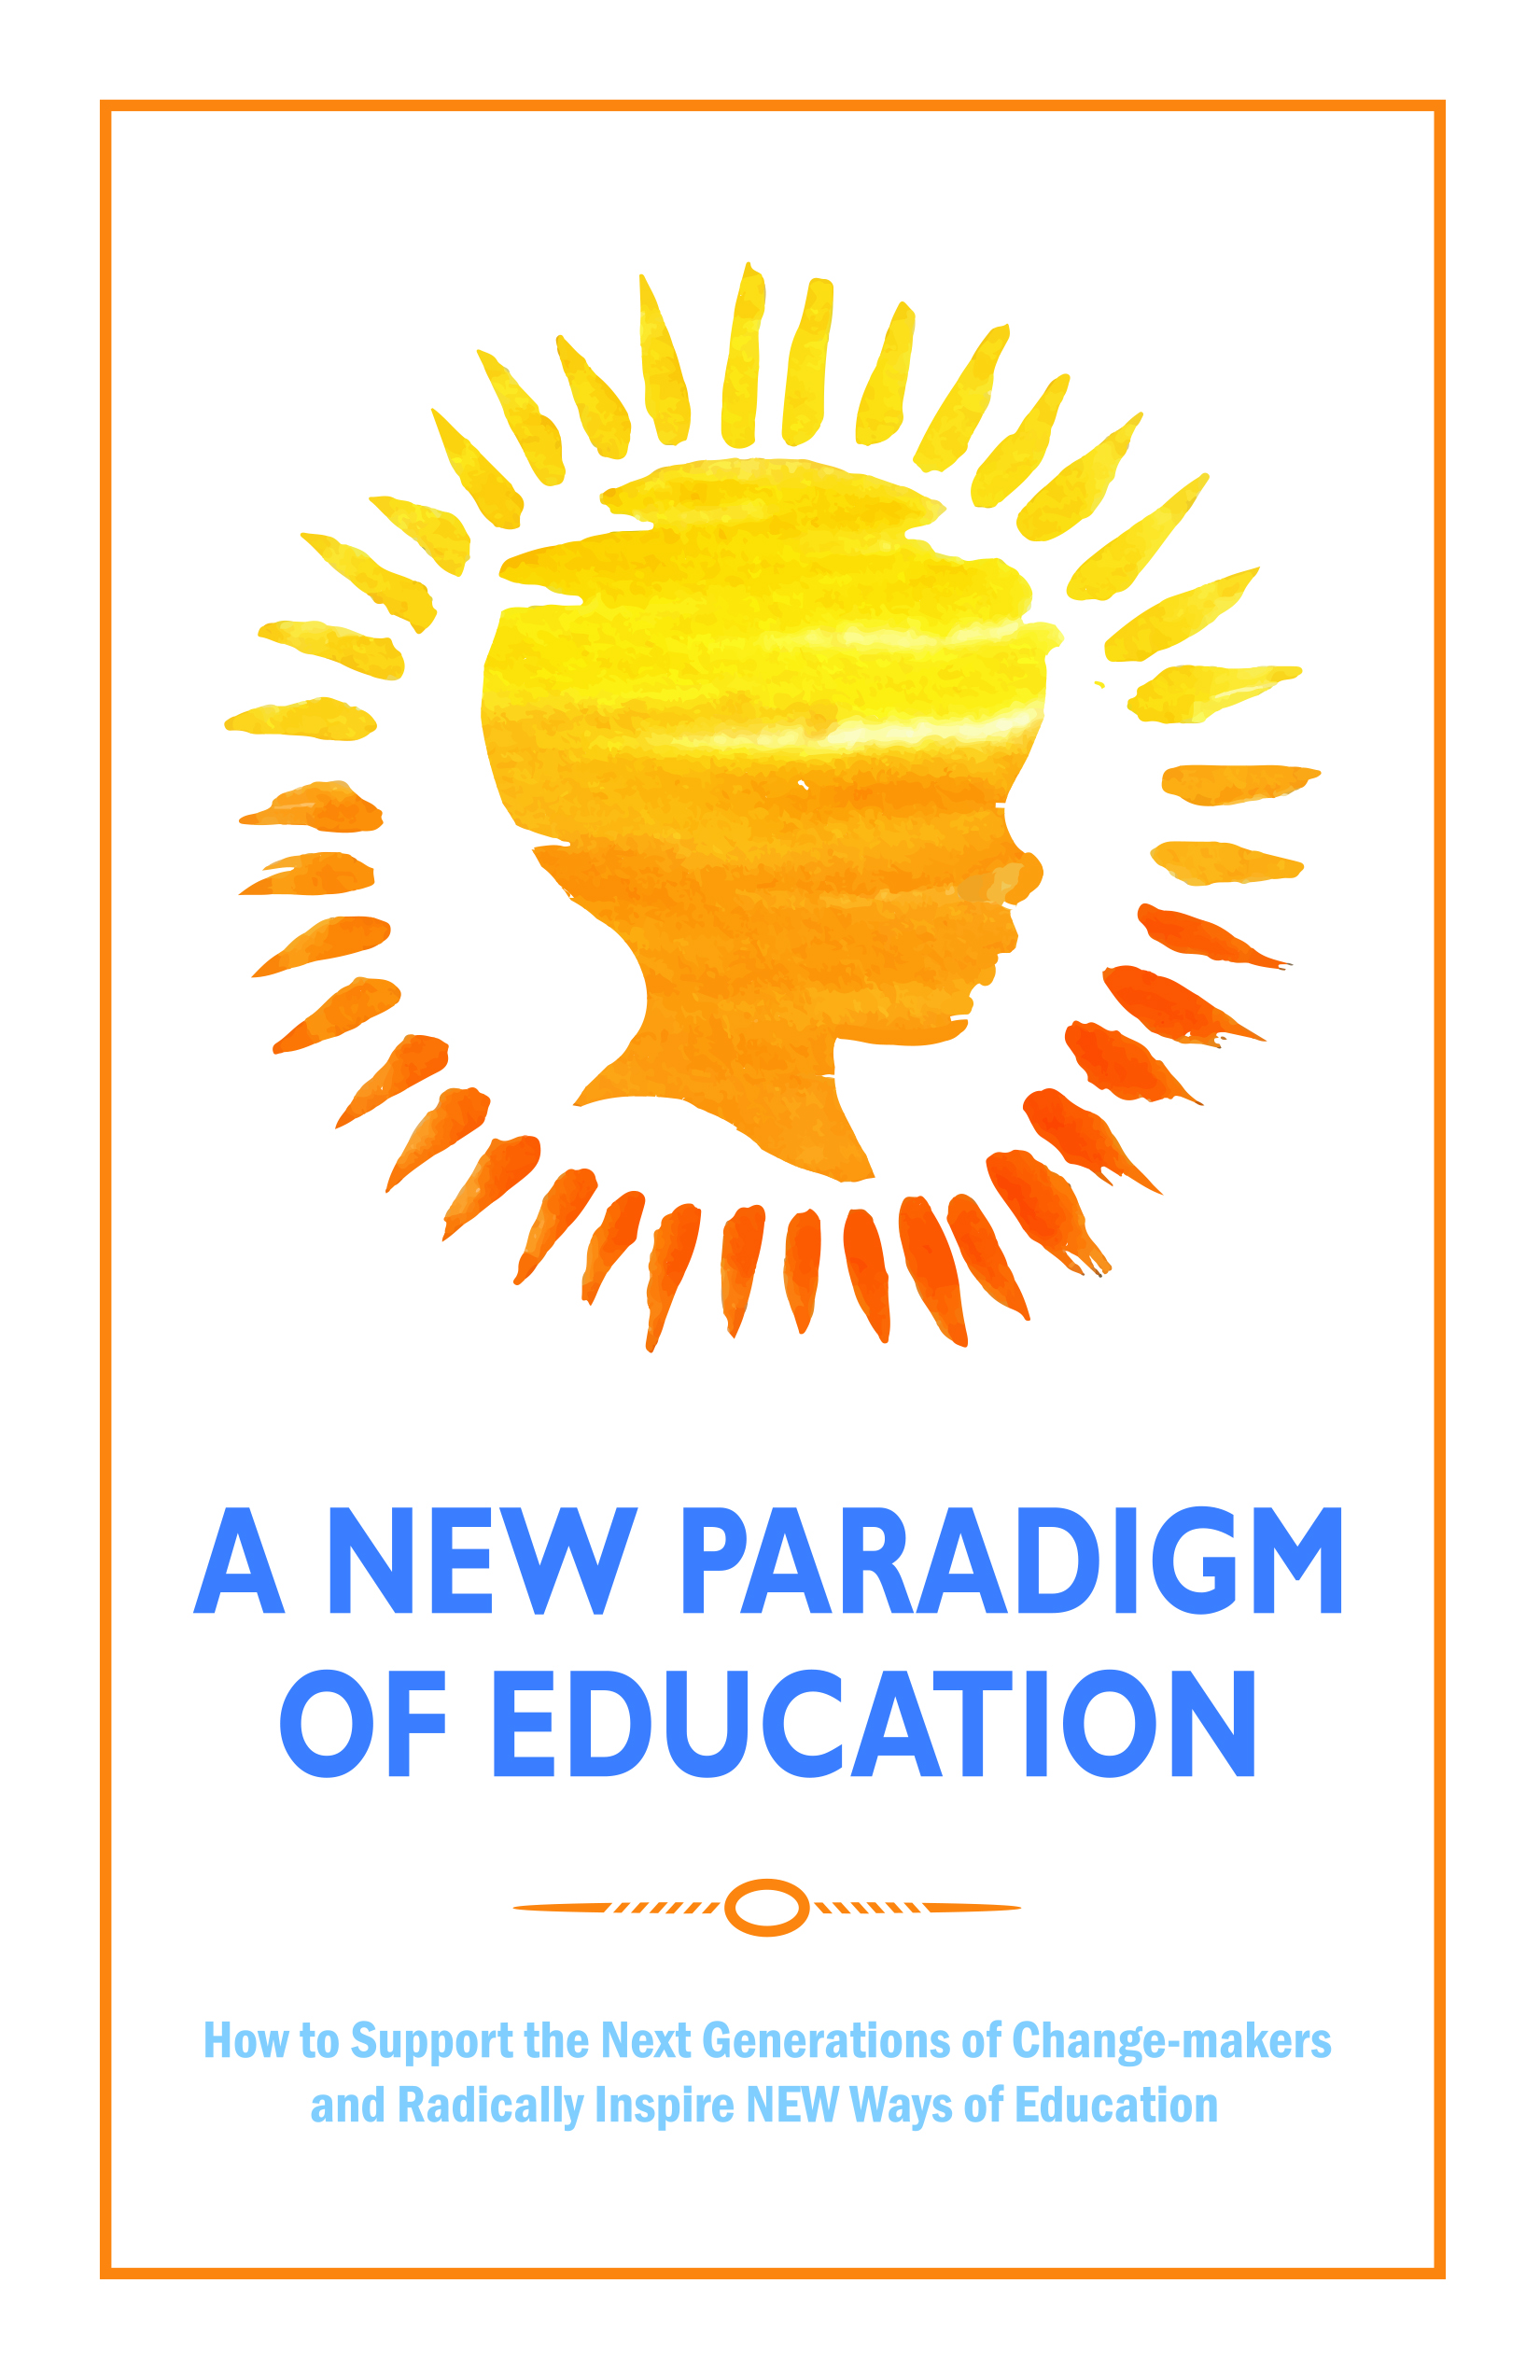 FREE: A New Paradigm of Education by Monique Sayers